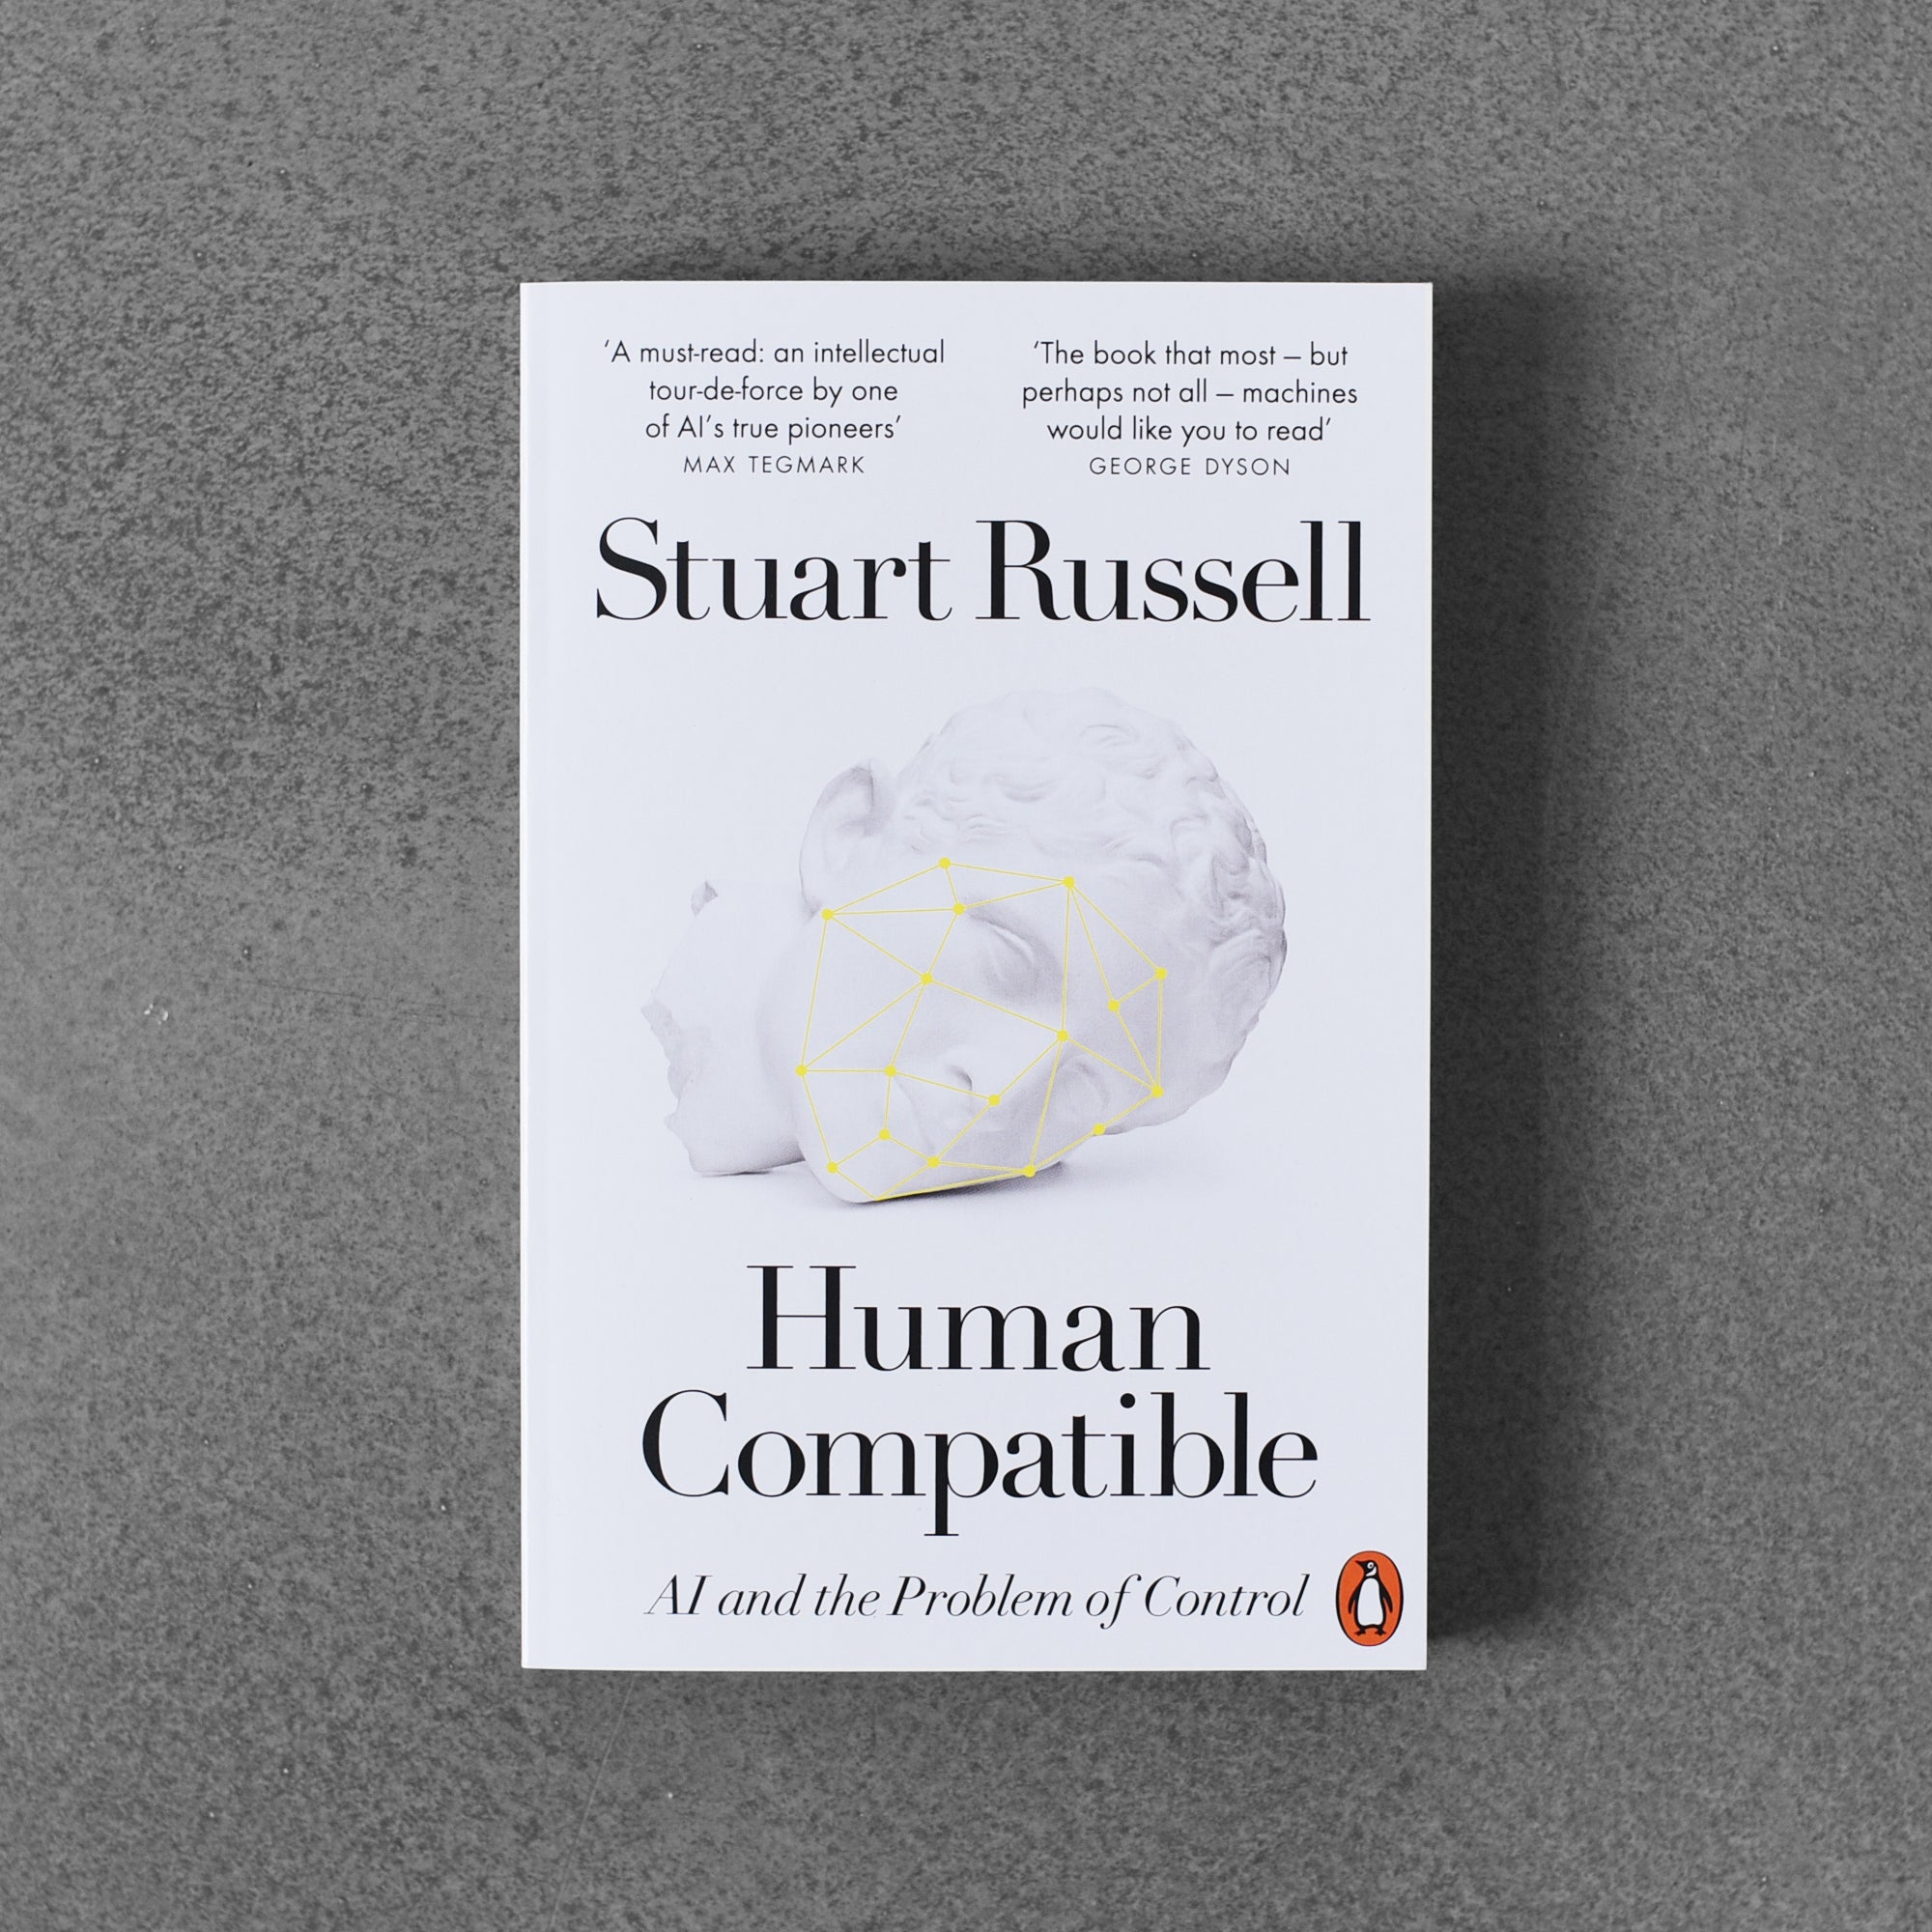 human compatible book review